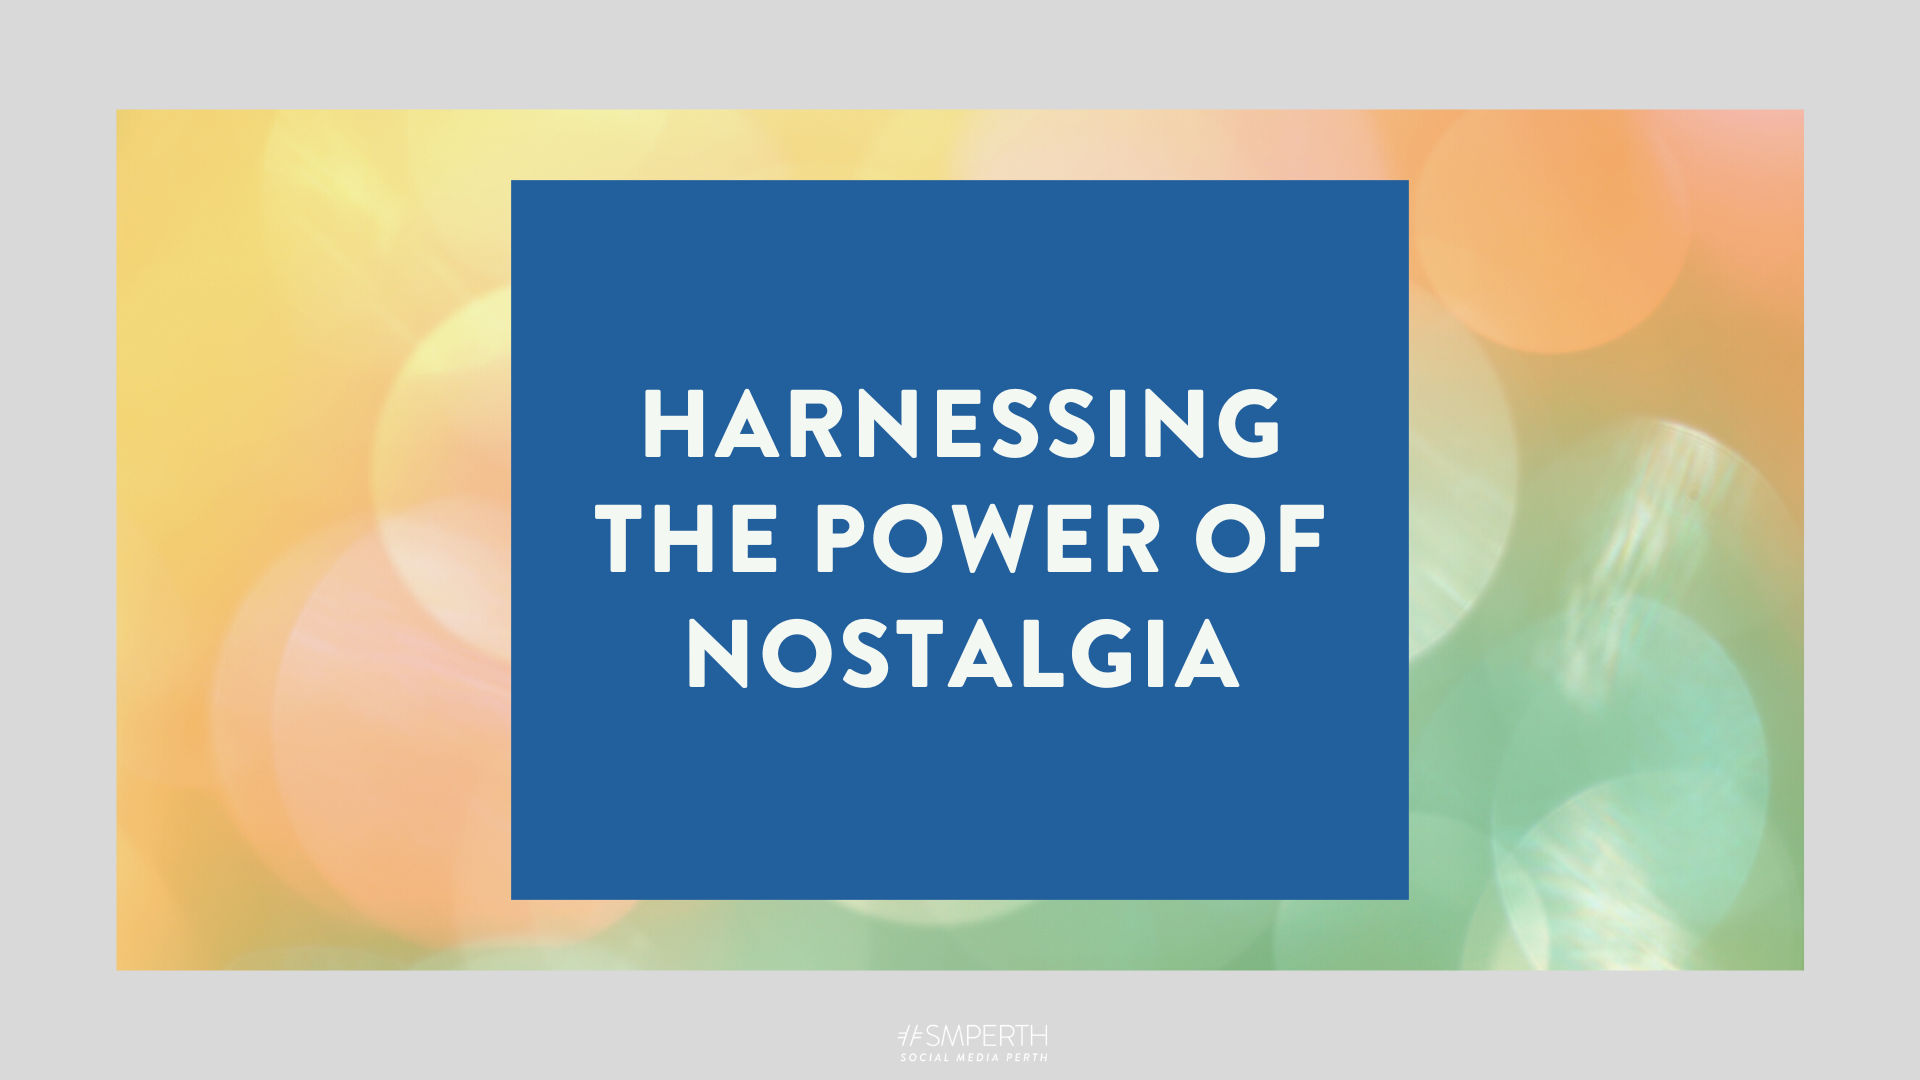 Harnessing the Power of Nostalgia